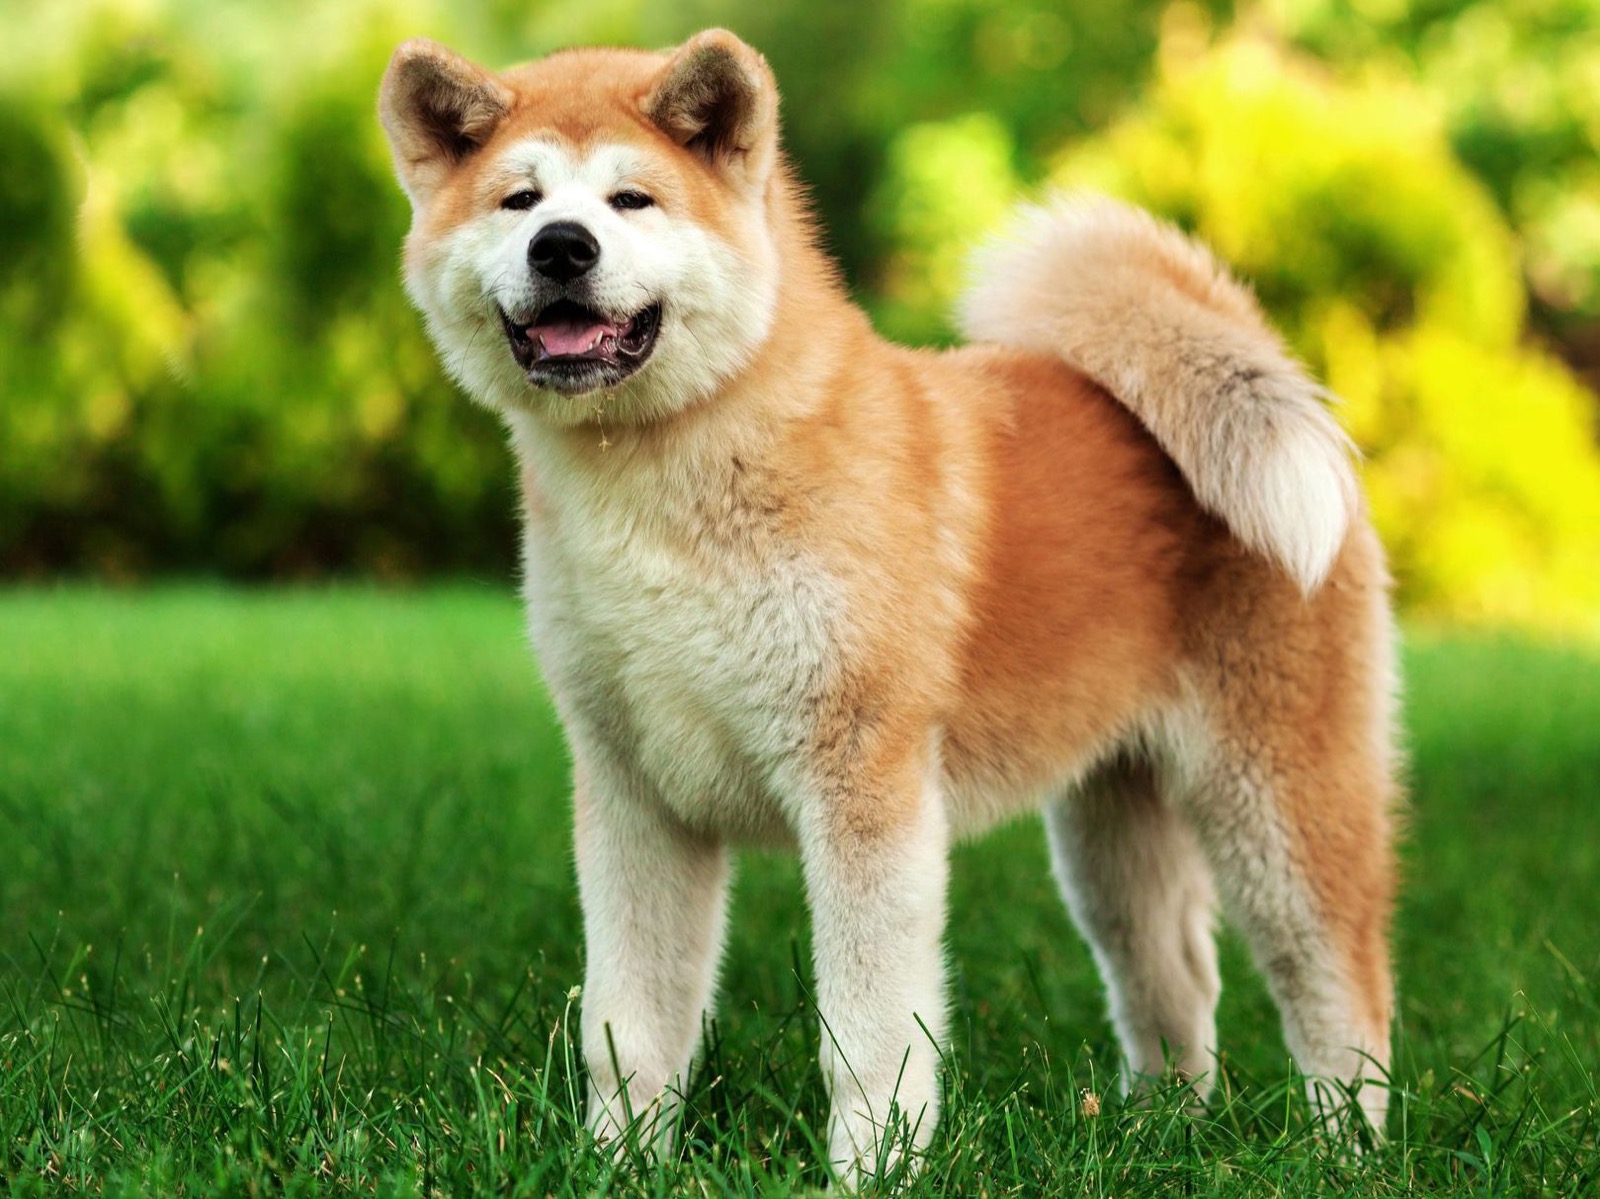 Only the Biggest Dog Lovers Can Identify All 20 of These Breeds 🐾 — Can You? Akita Inu